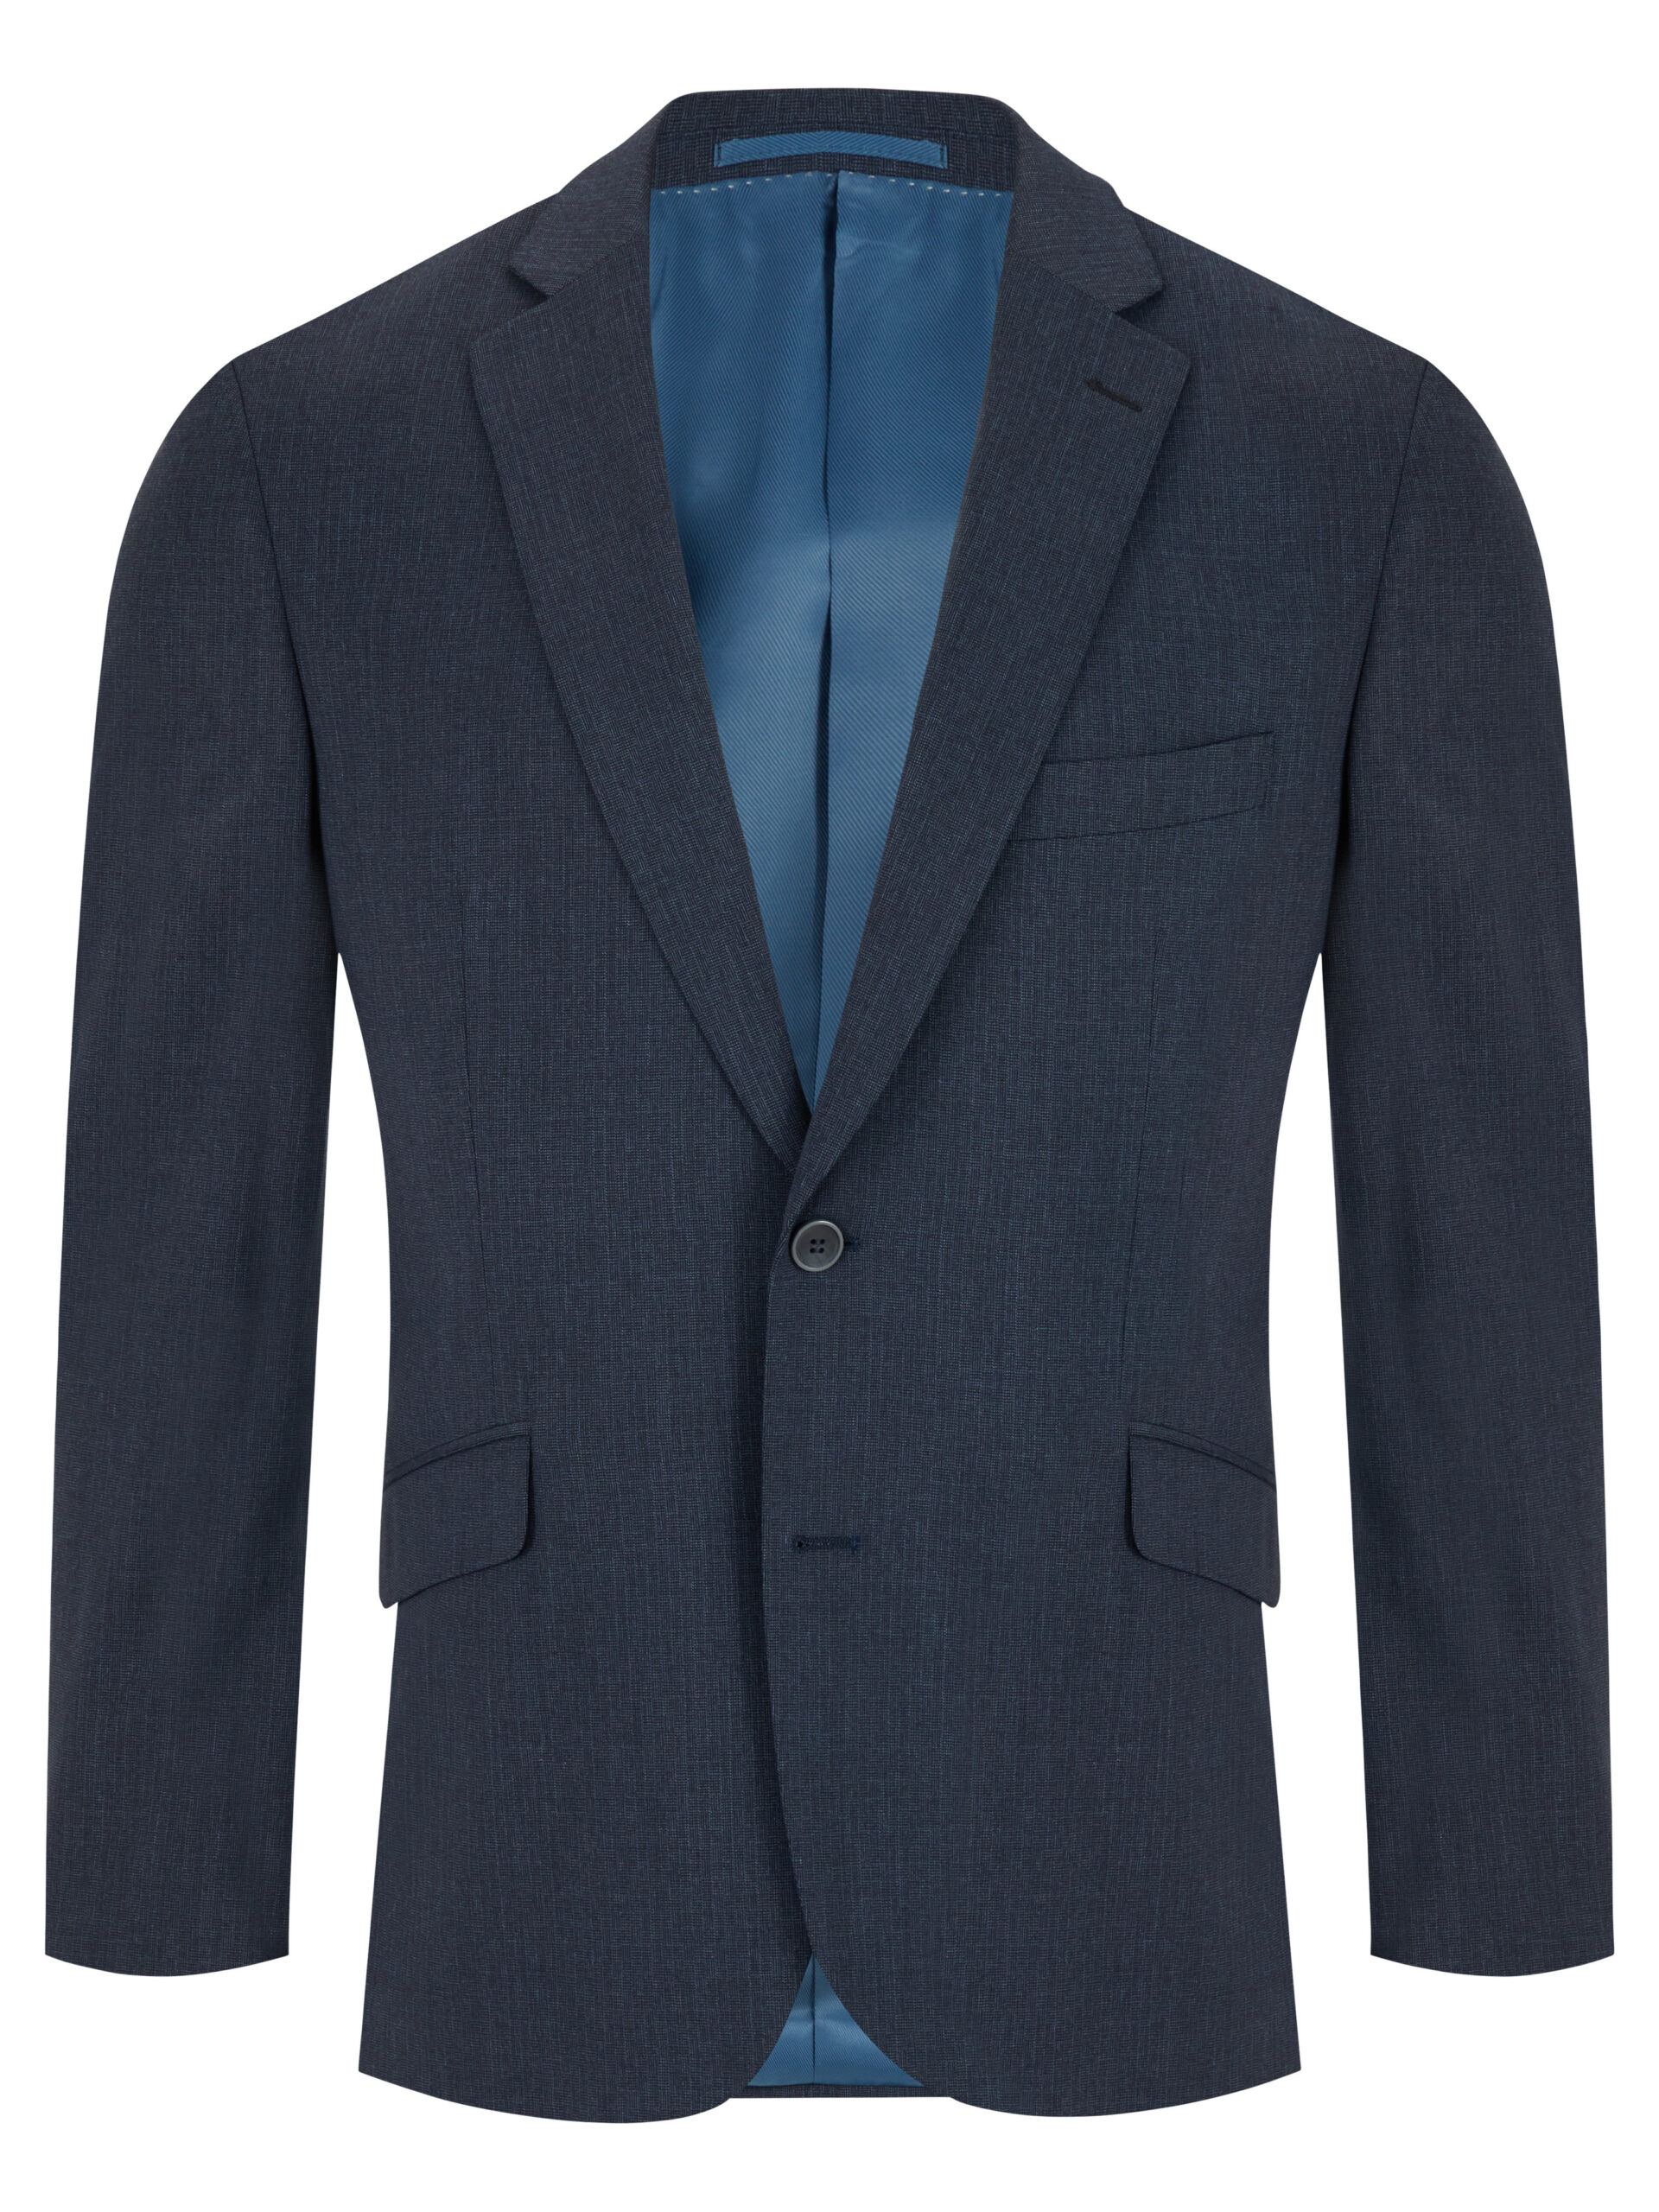 DG DAWSON 2 PC SUIT | Morans Menswear and Clothing, Thurles, Co. Tipperary